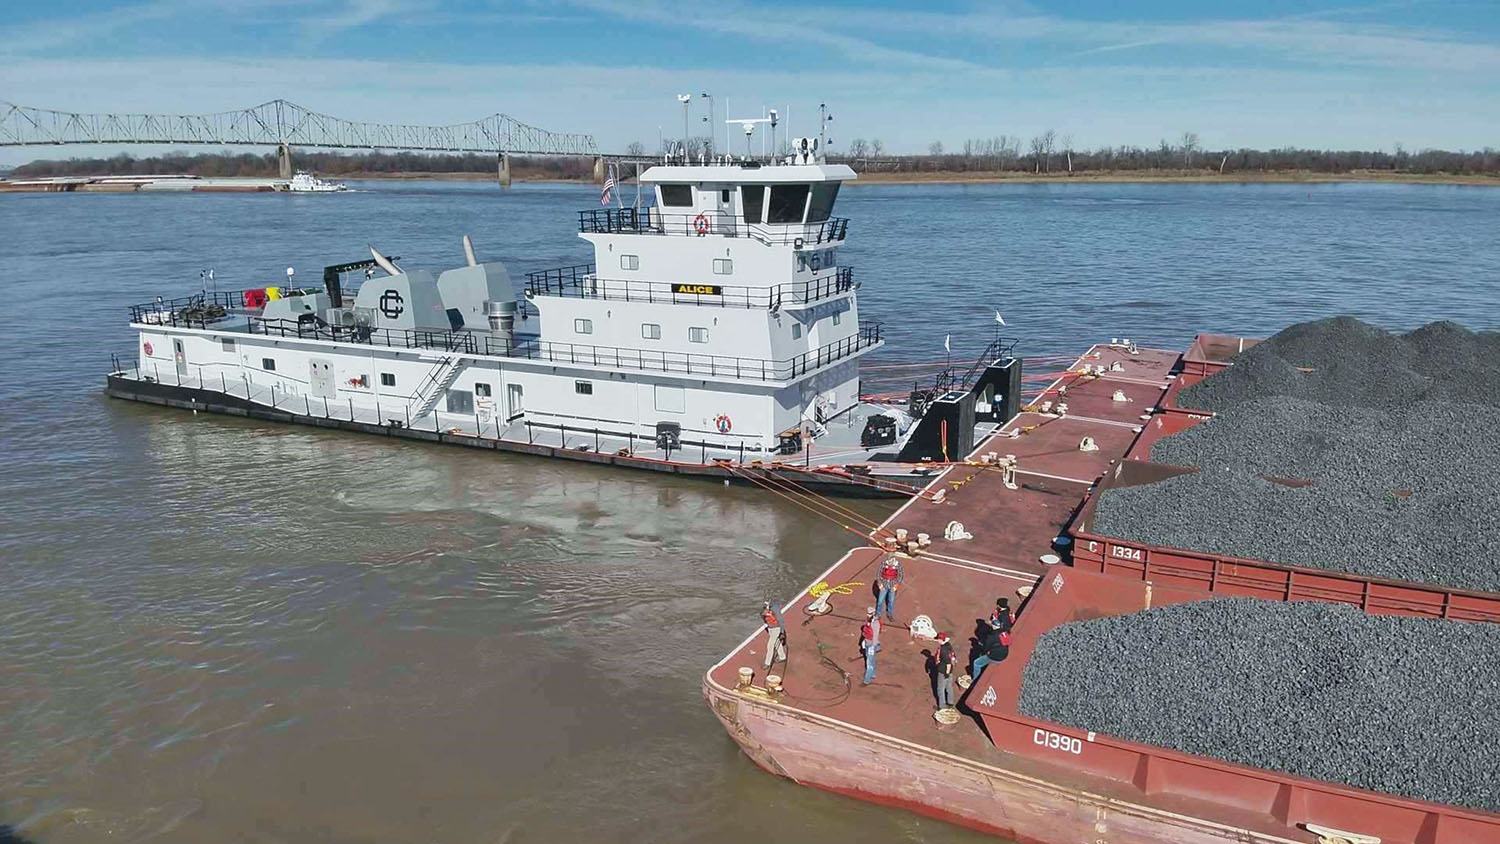 The 6,034 hp. mv. Alice is the second 6,034 hp. towboat Conrad Shipyard has built for Crounse. (Photo courtesy of Crounse Corporation)